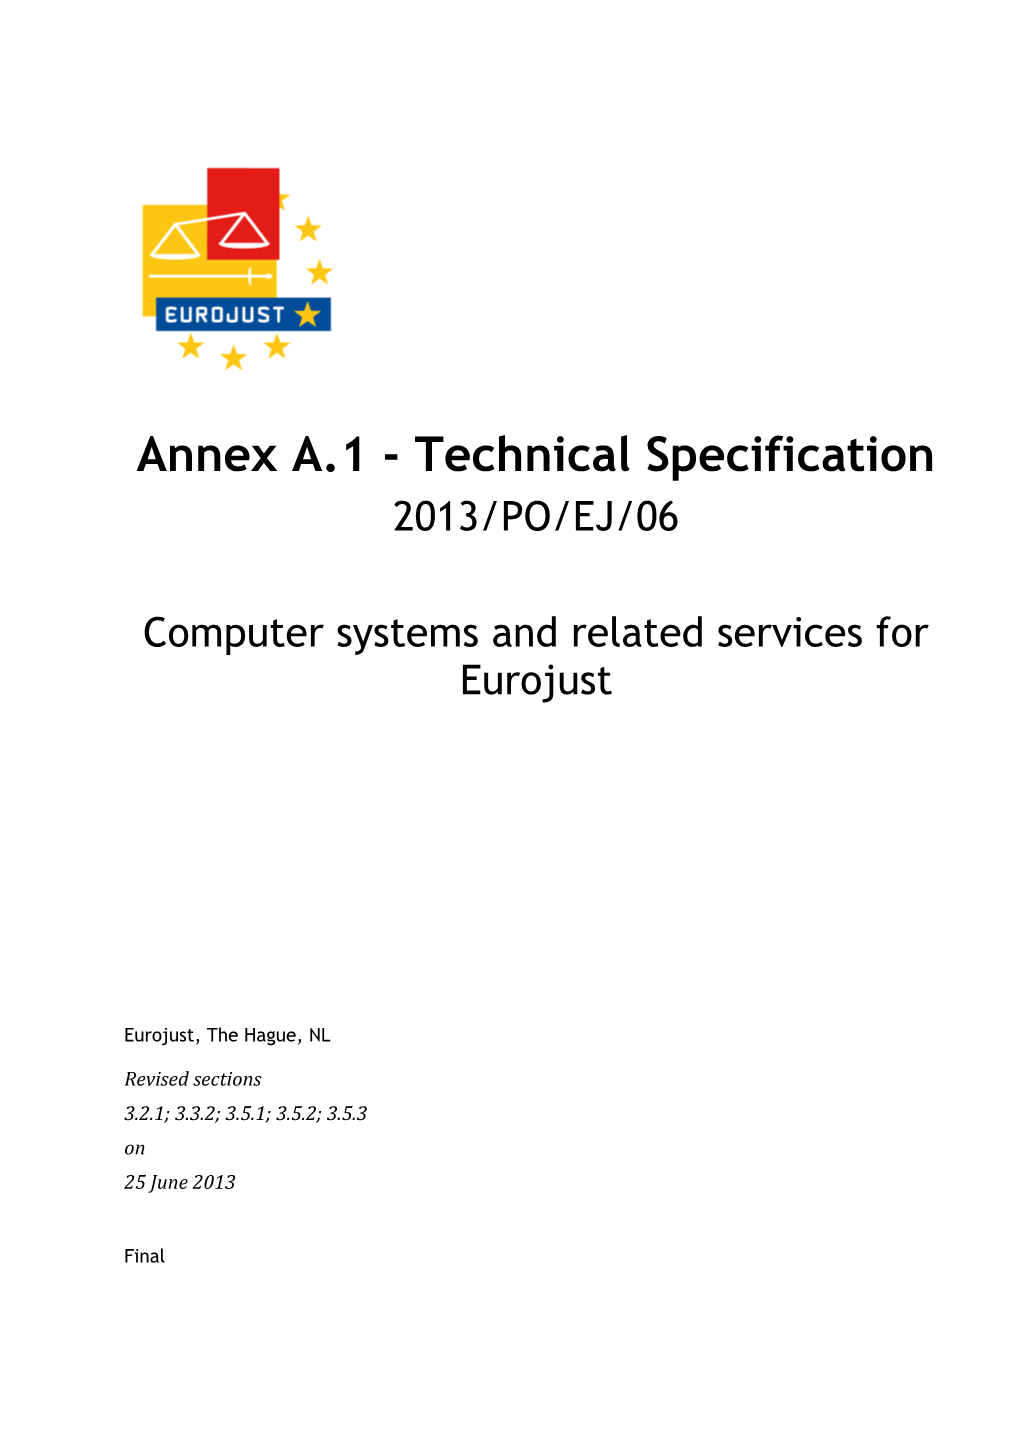 Annex A1 - Technical Specifications (Lot 1)